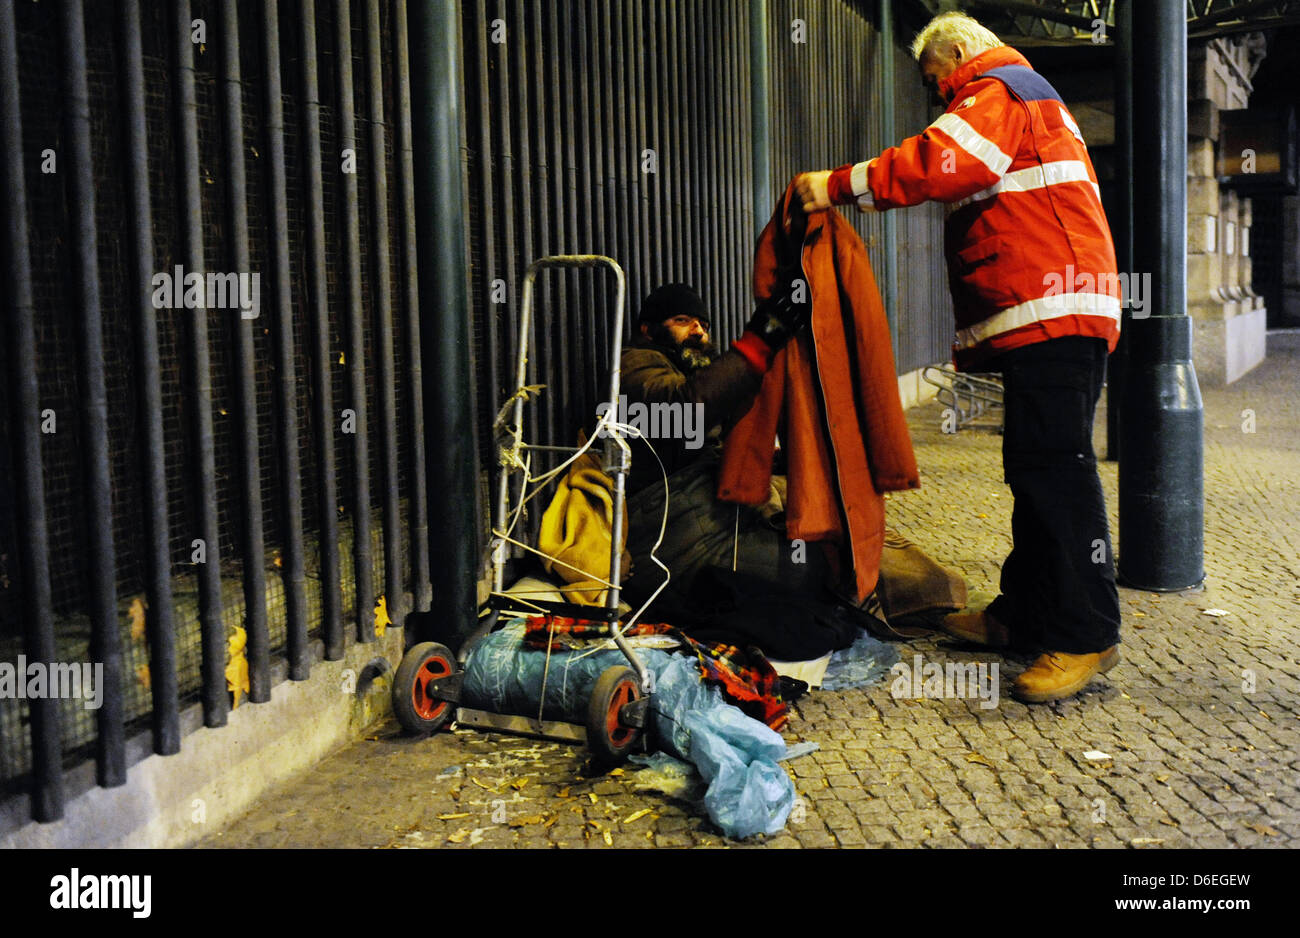 A staff member of the German Red Cross cold assistance takes care of a homeless sleeping on the street in Berlin, Germany, 30 January 2012. Berlin's emergency shelters are fully booked out. The demand of sleeping places is even greater than the current supply. Photo: Maurizio Gambarini Stock Photo